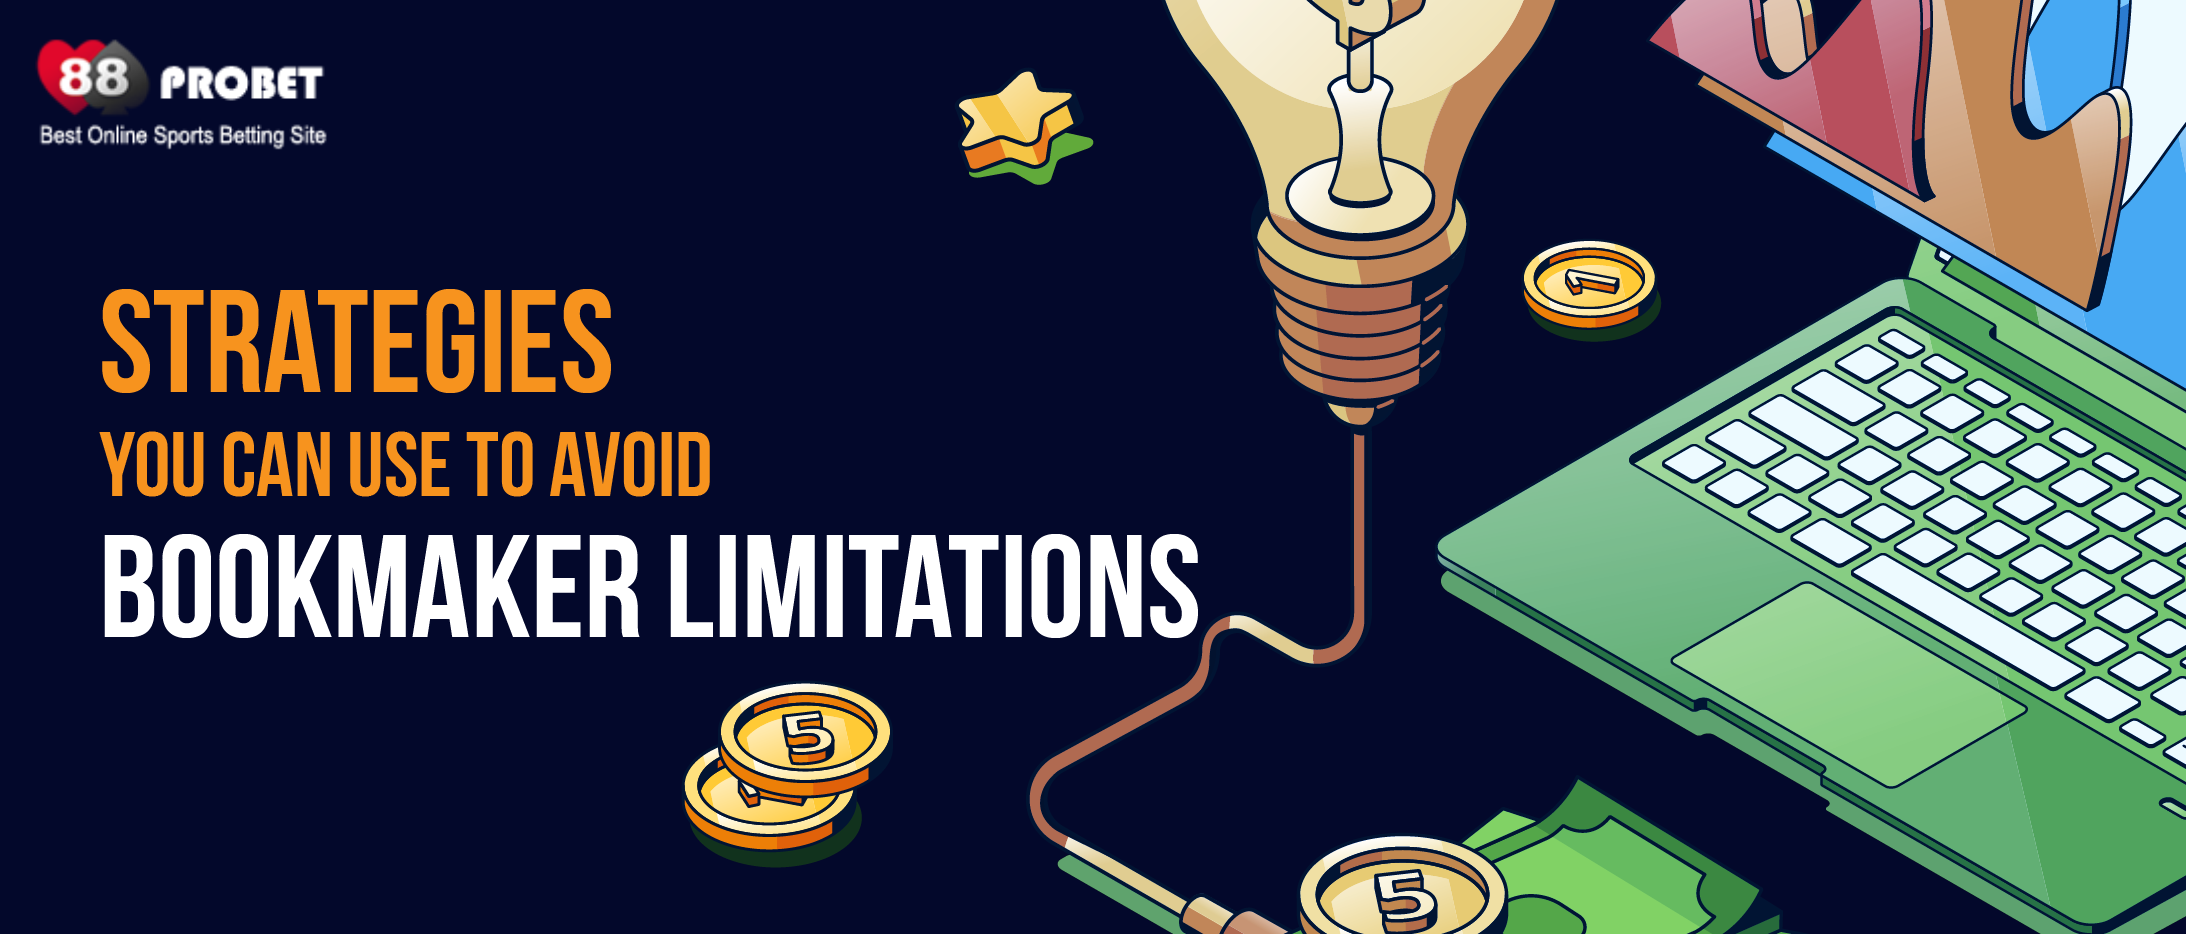 Strategies You Can Use to Avoid Bookmaker Limitations